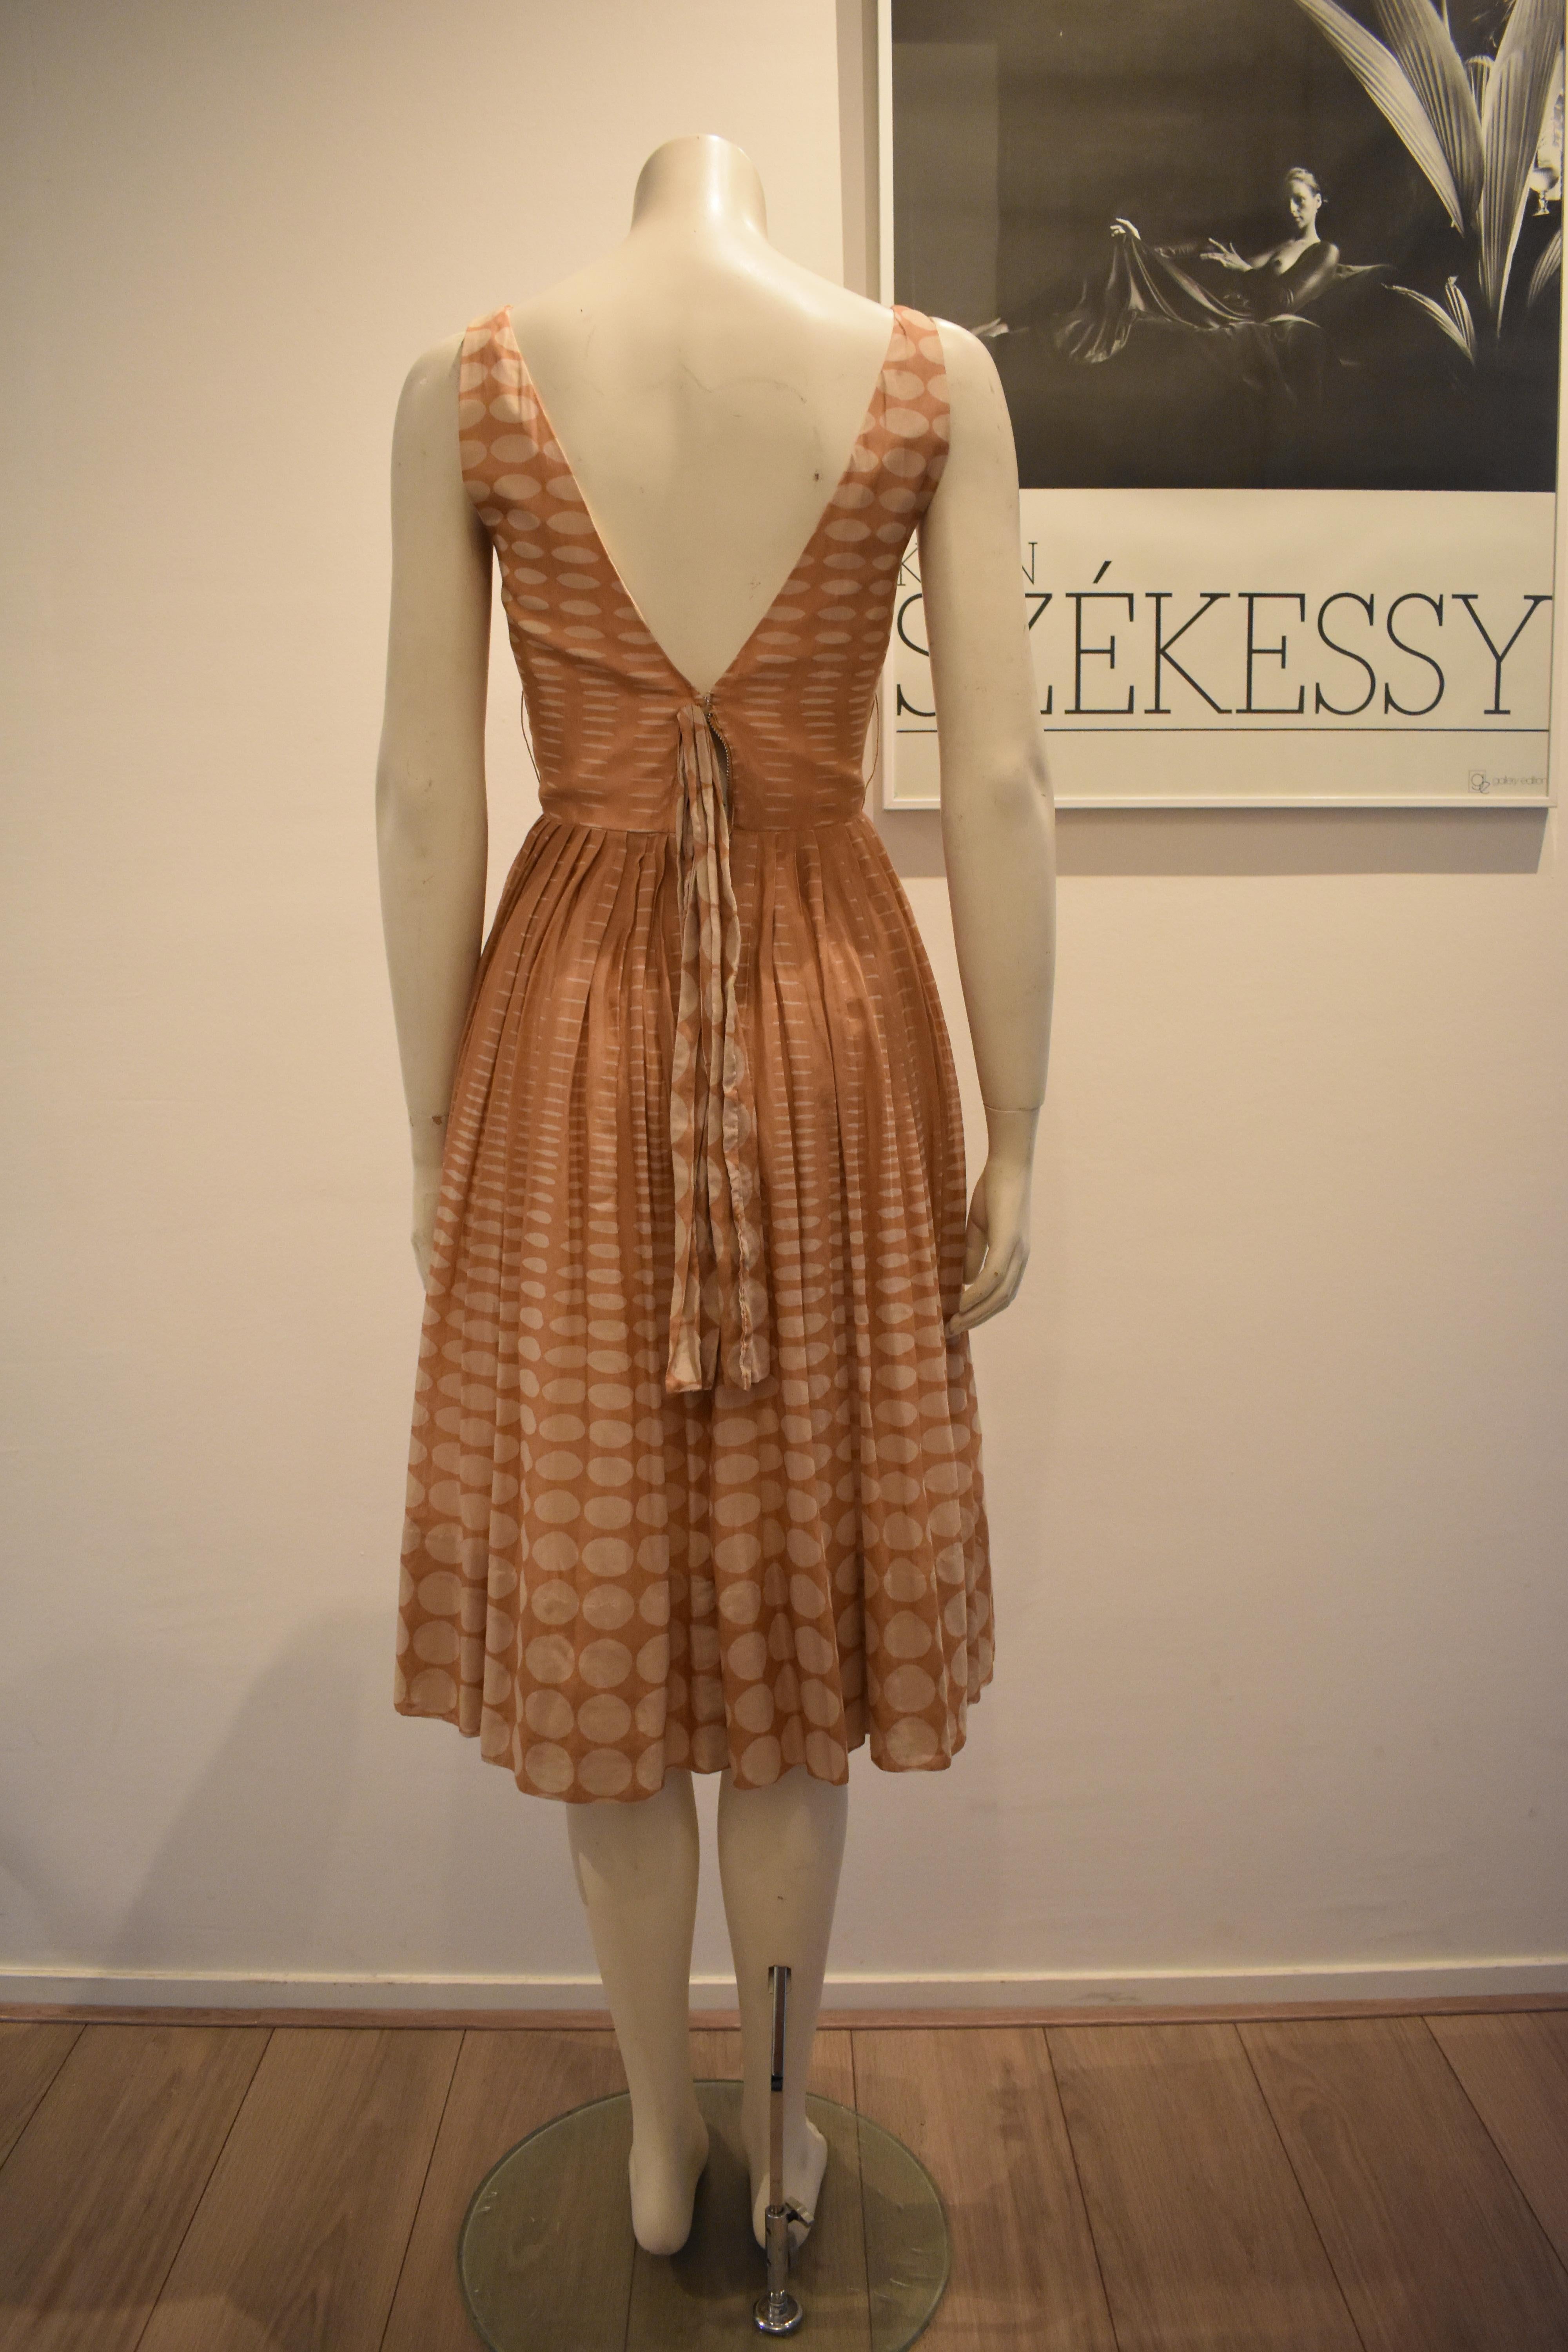 Women's Vintage 1950s Batiste Handmade Dress with a Flowy Pleated Skirt For Sale